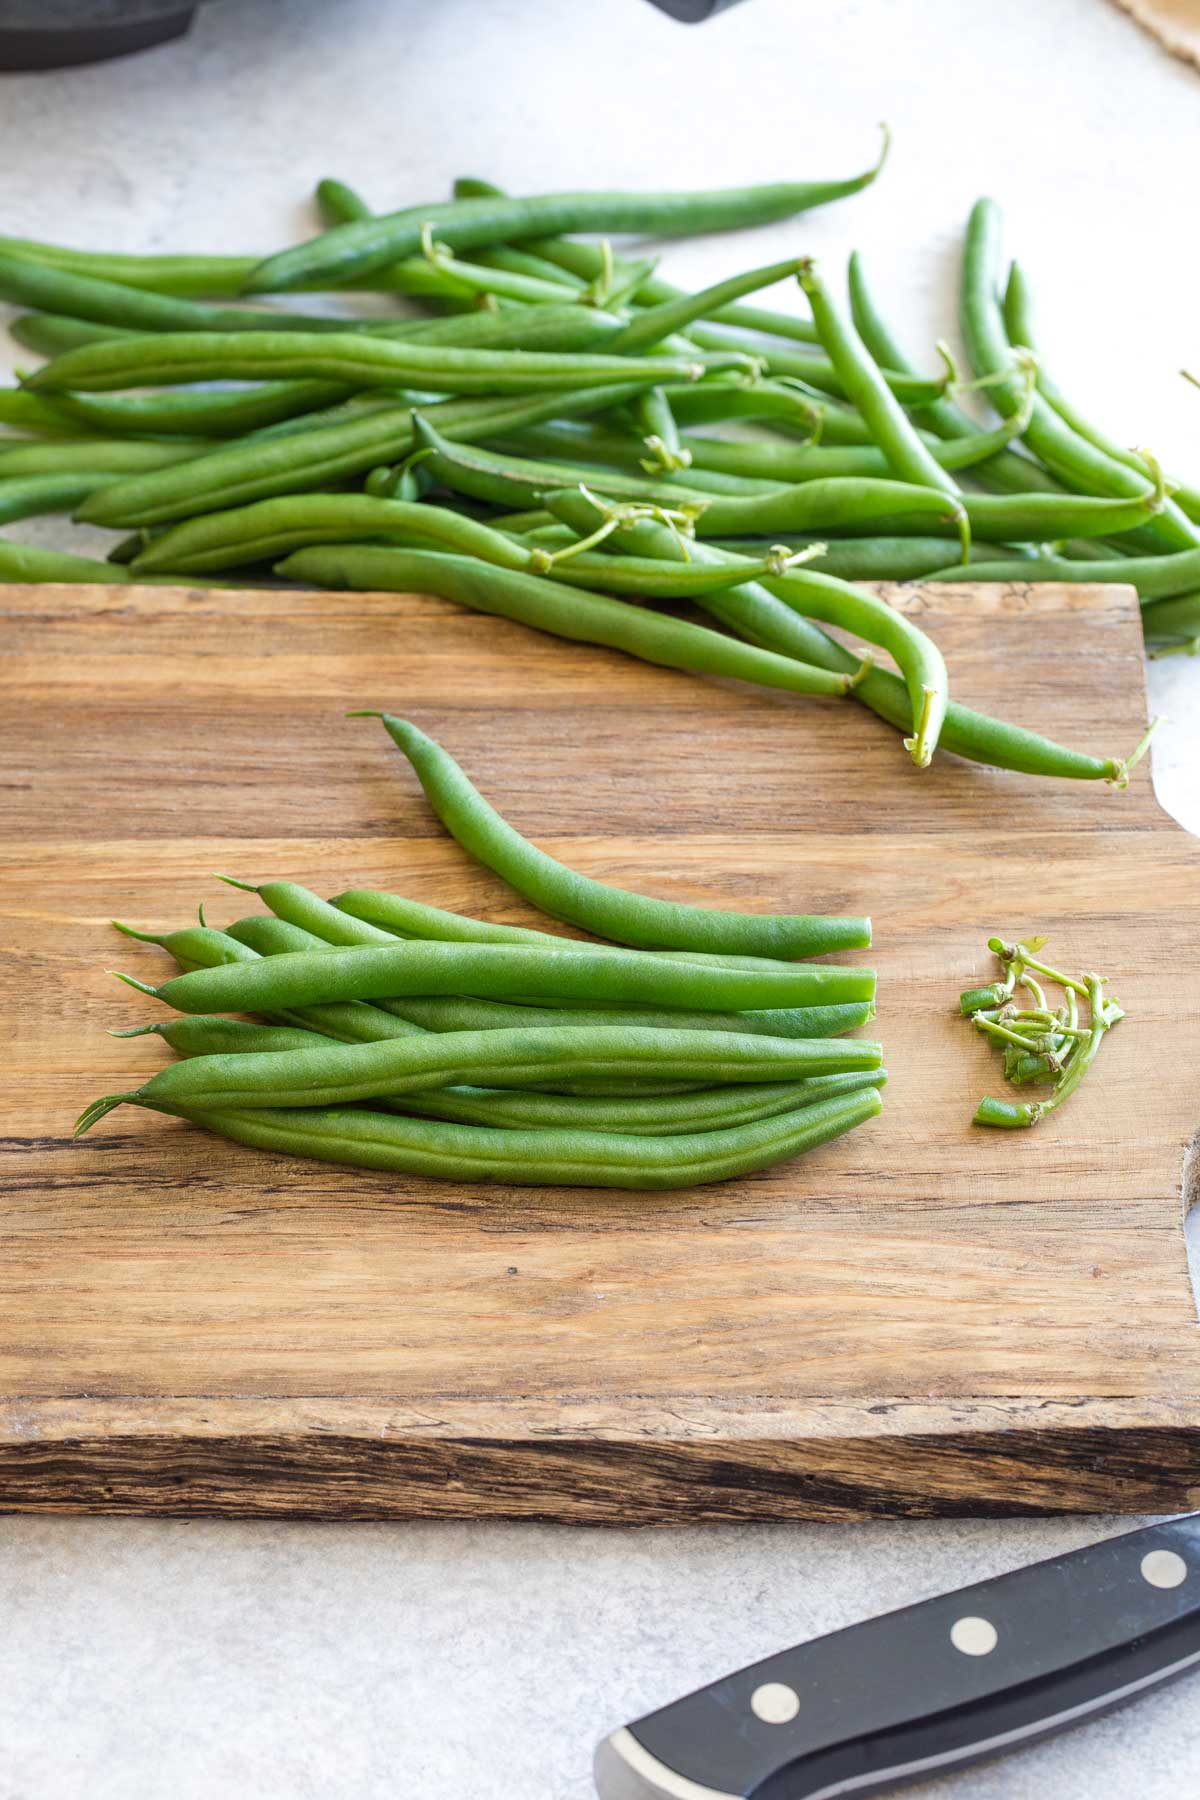 Small pile of green beans gathered together on cutting board to show how to trim off several stems at once.